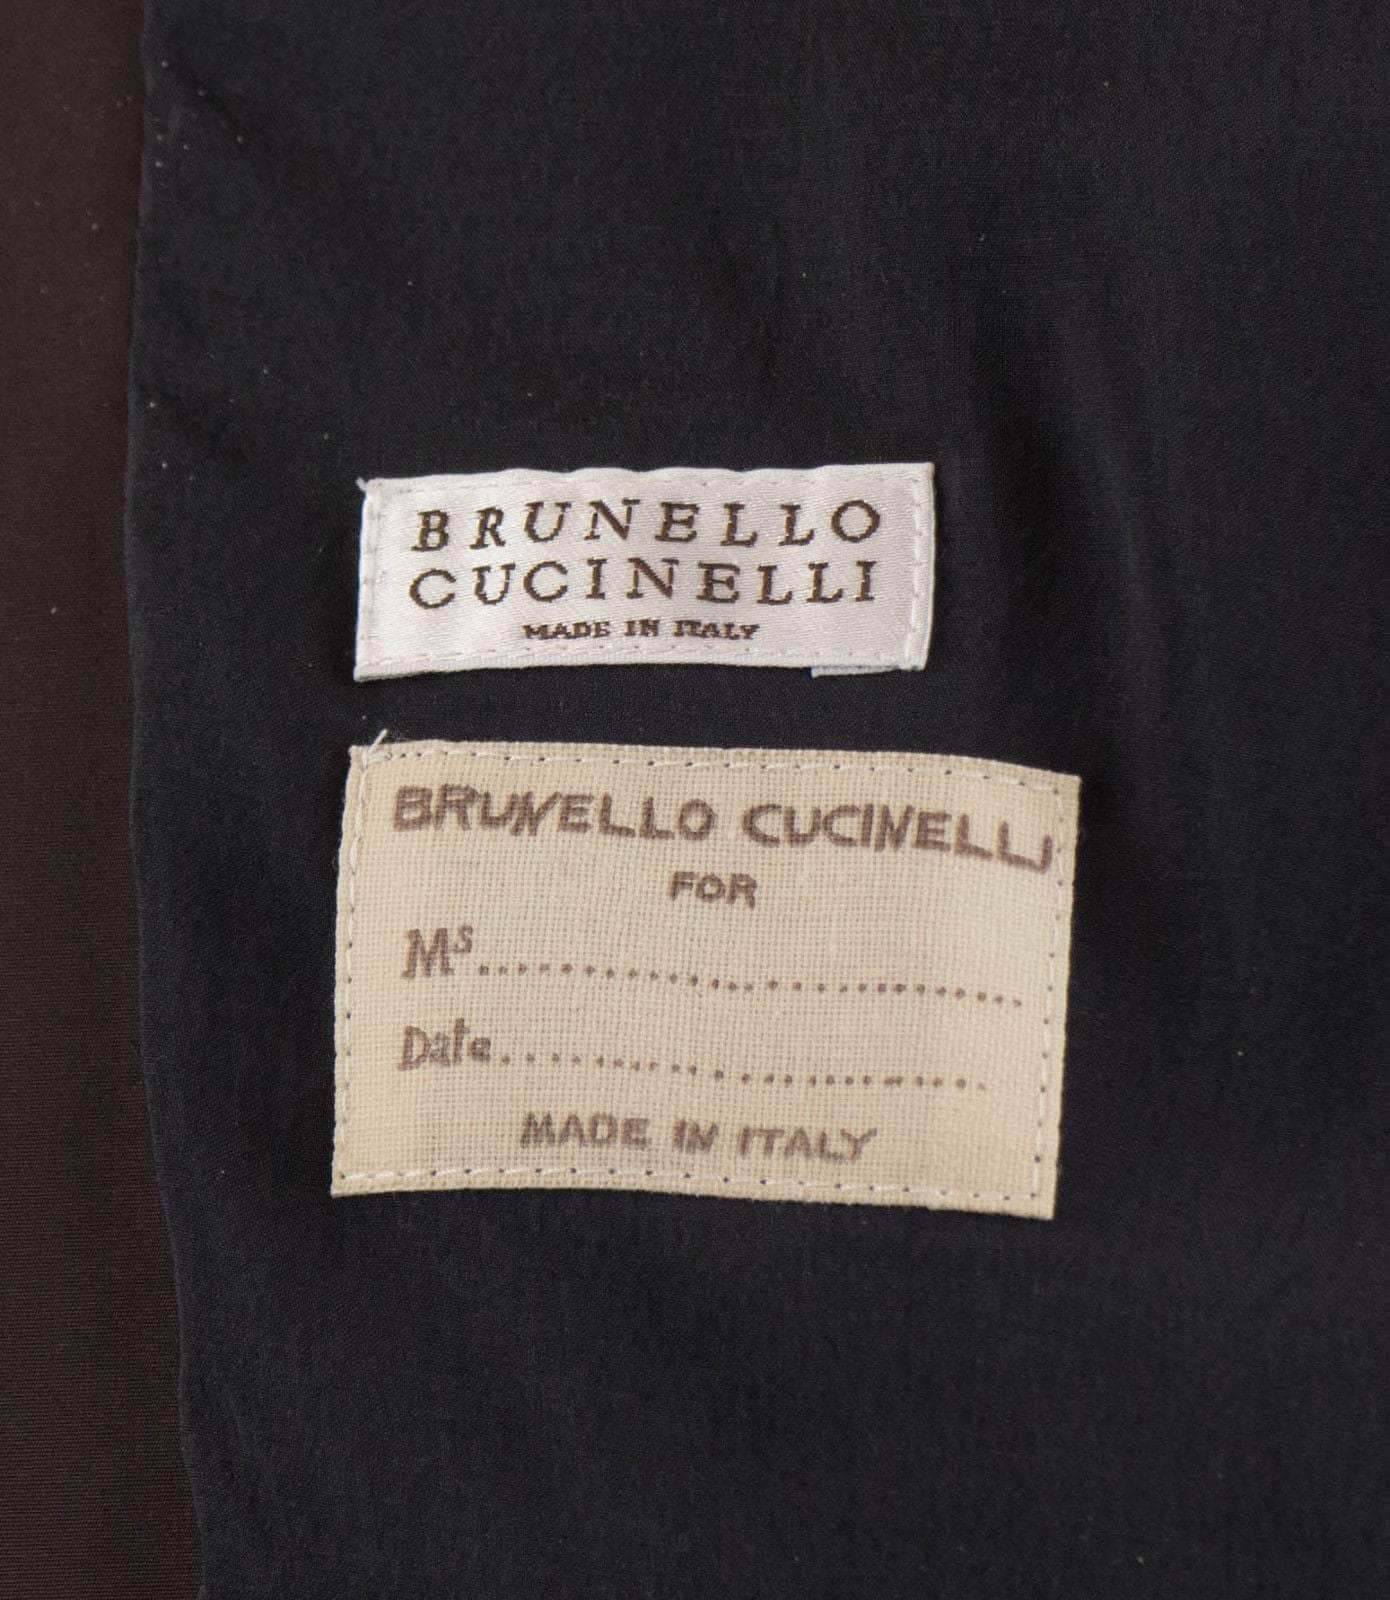 Brunello Cucinelli 500-750, brunello-cucinelli, channelenable-all, chicmi, couponcollection, gender-womens, main-clothing, size-6, womens-trench-coats 6 Brown Silk Blend Full Length Trench Coat JF1-R6-15/6 JF1-R6-15/6